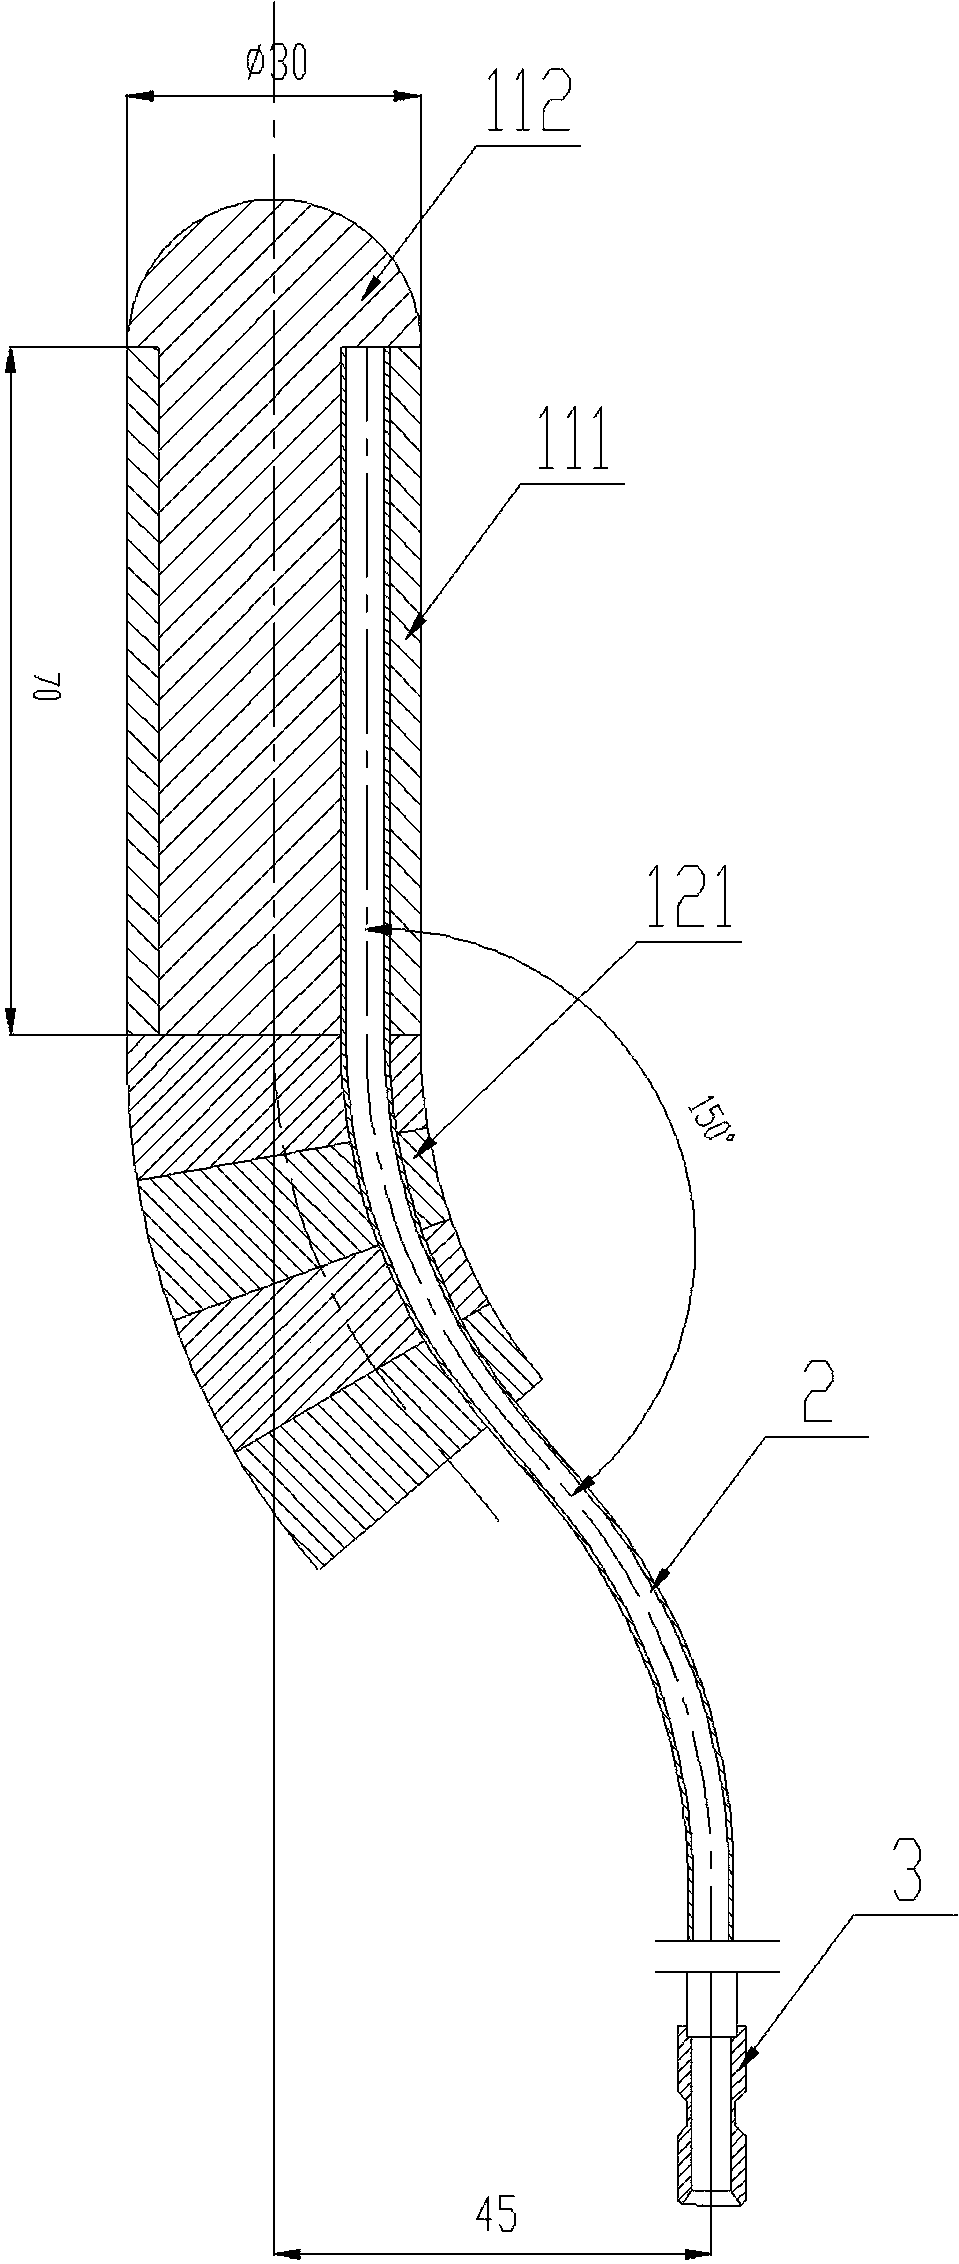 Source applicator for anal canal tumor radiotherapy